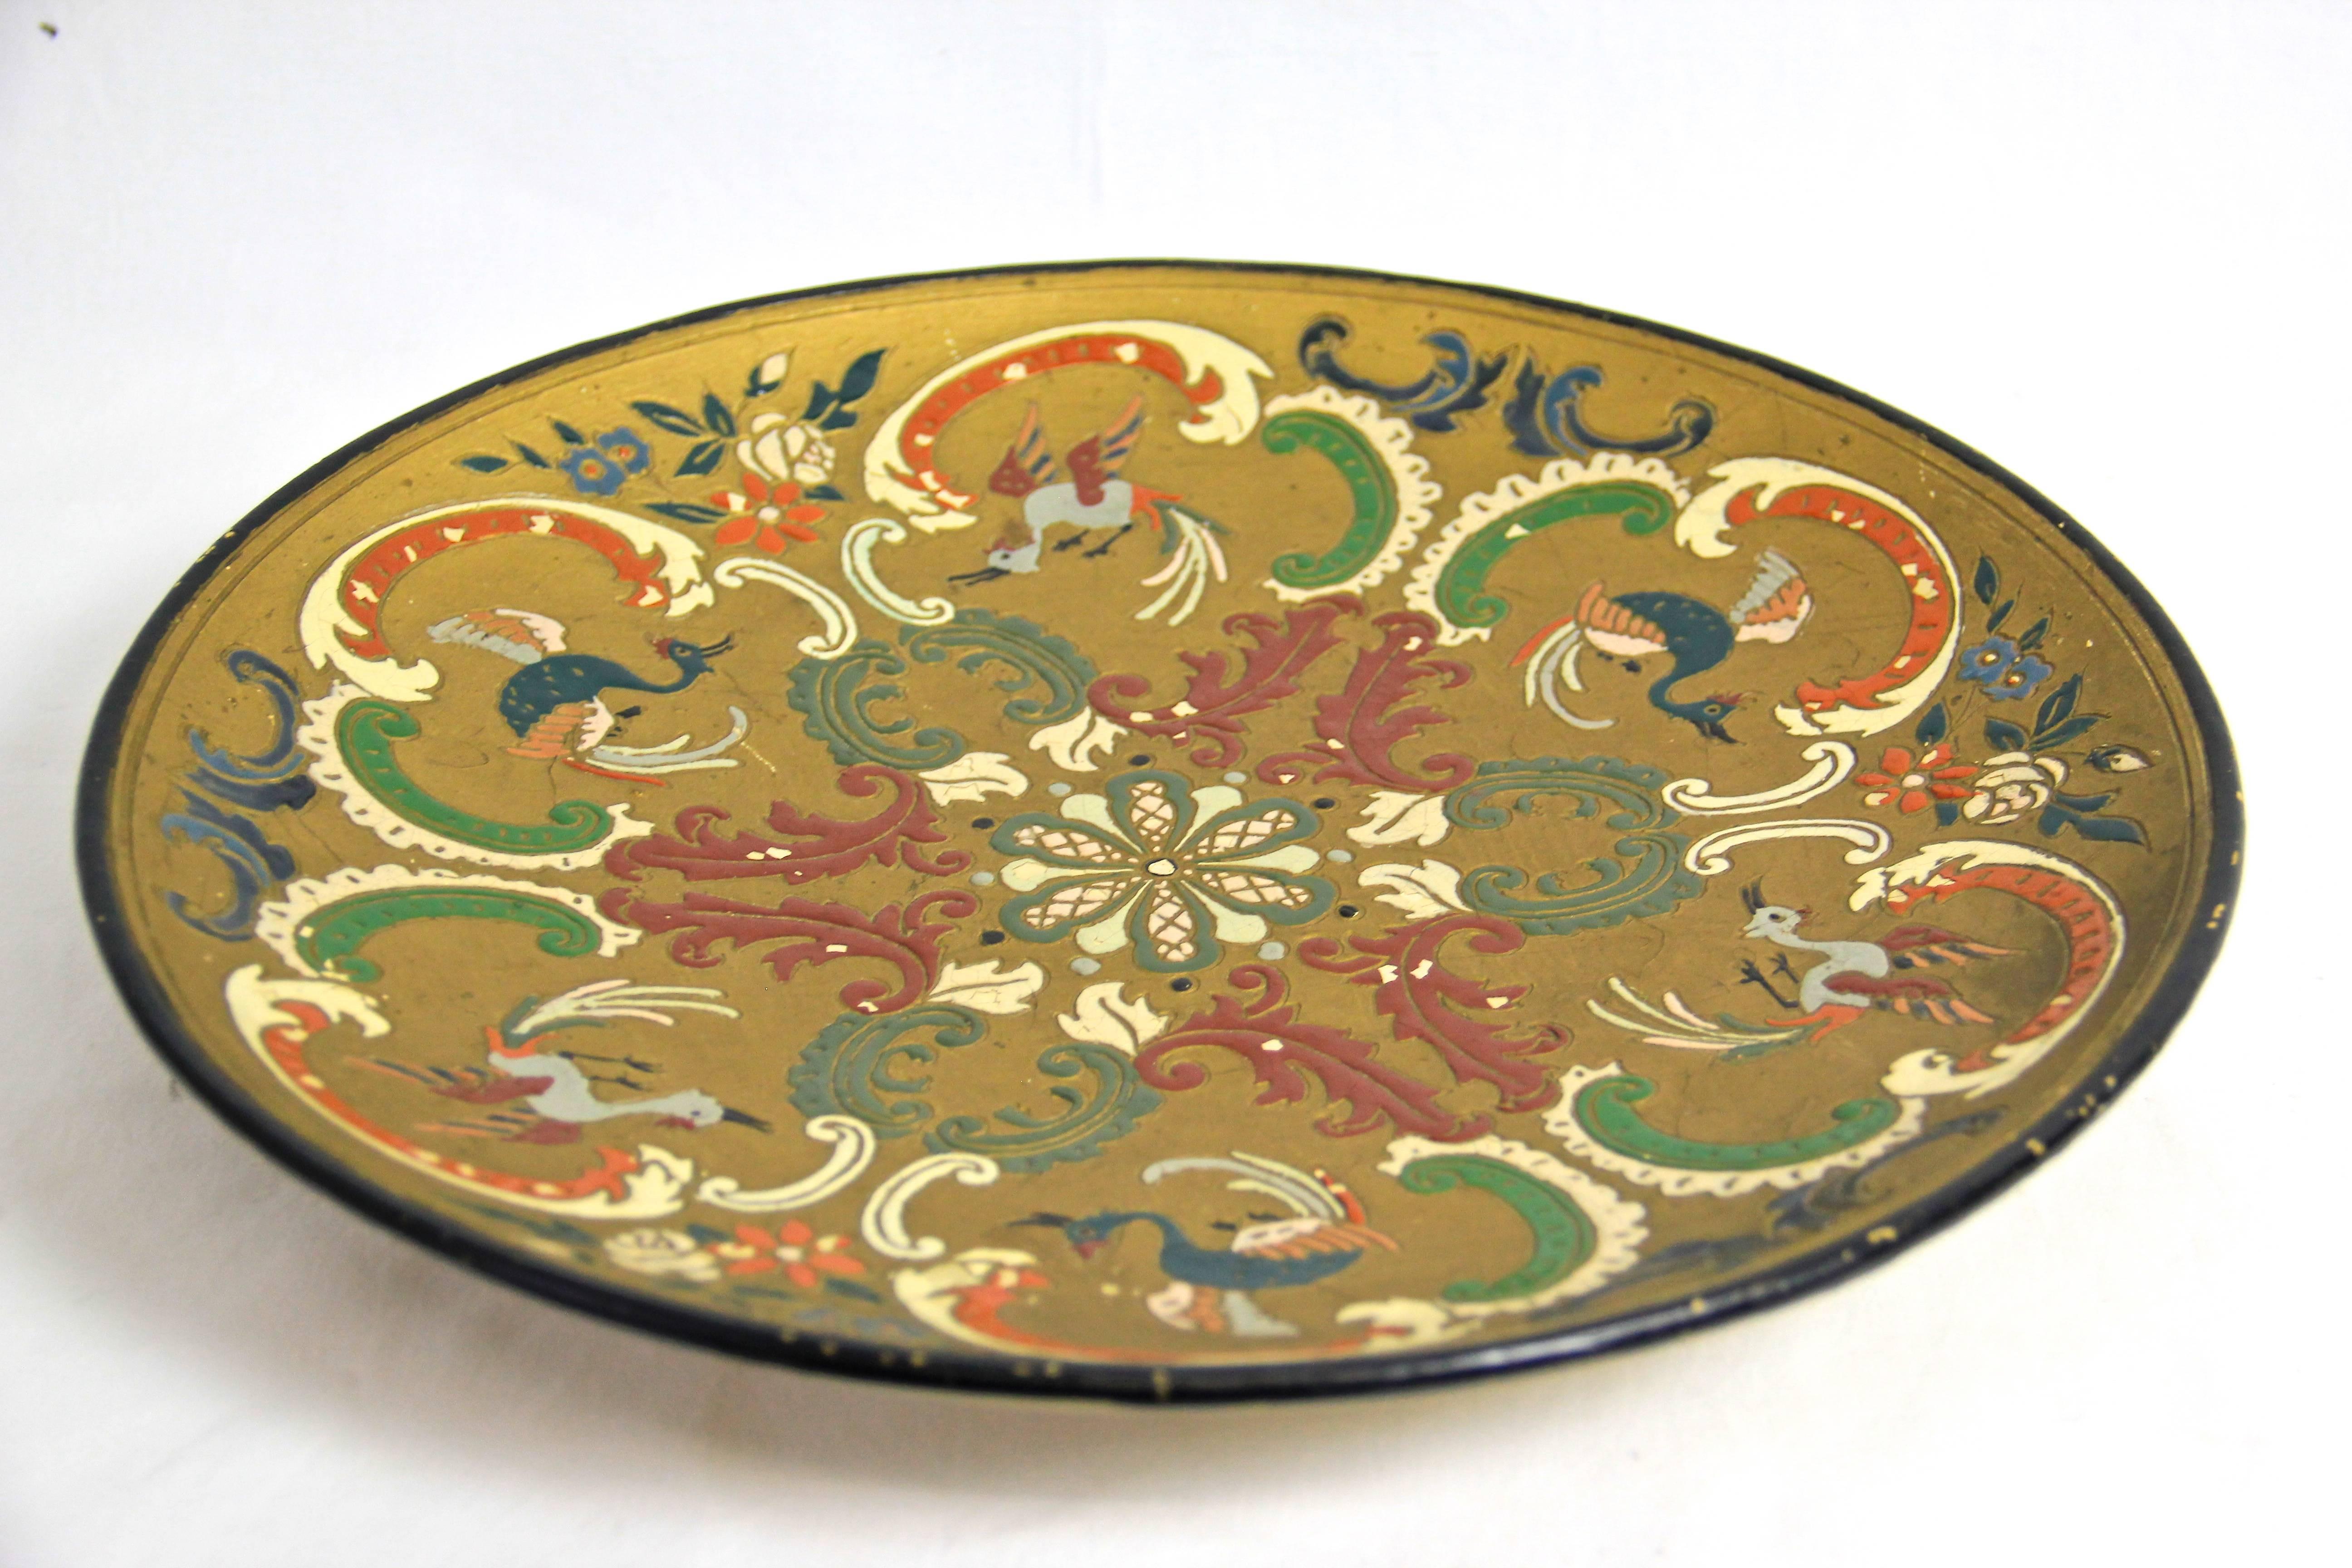 Majolica/ceramic plate by the famous manufacture of Wilhelm Schiller & Son from circa 1895, which shows six colorful birds surrounded by floral design elements.
Please note: This item is in absolute original unrestored condition. There are some so